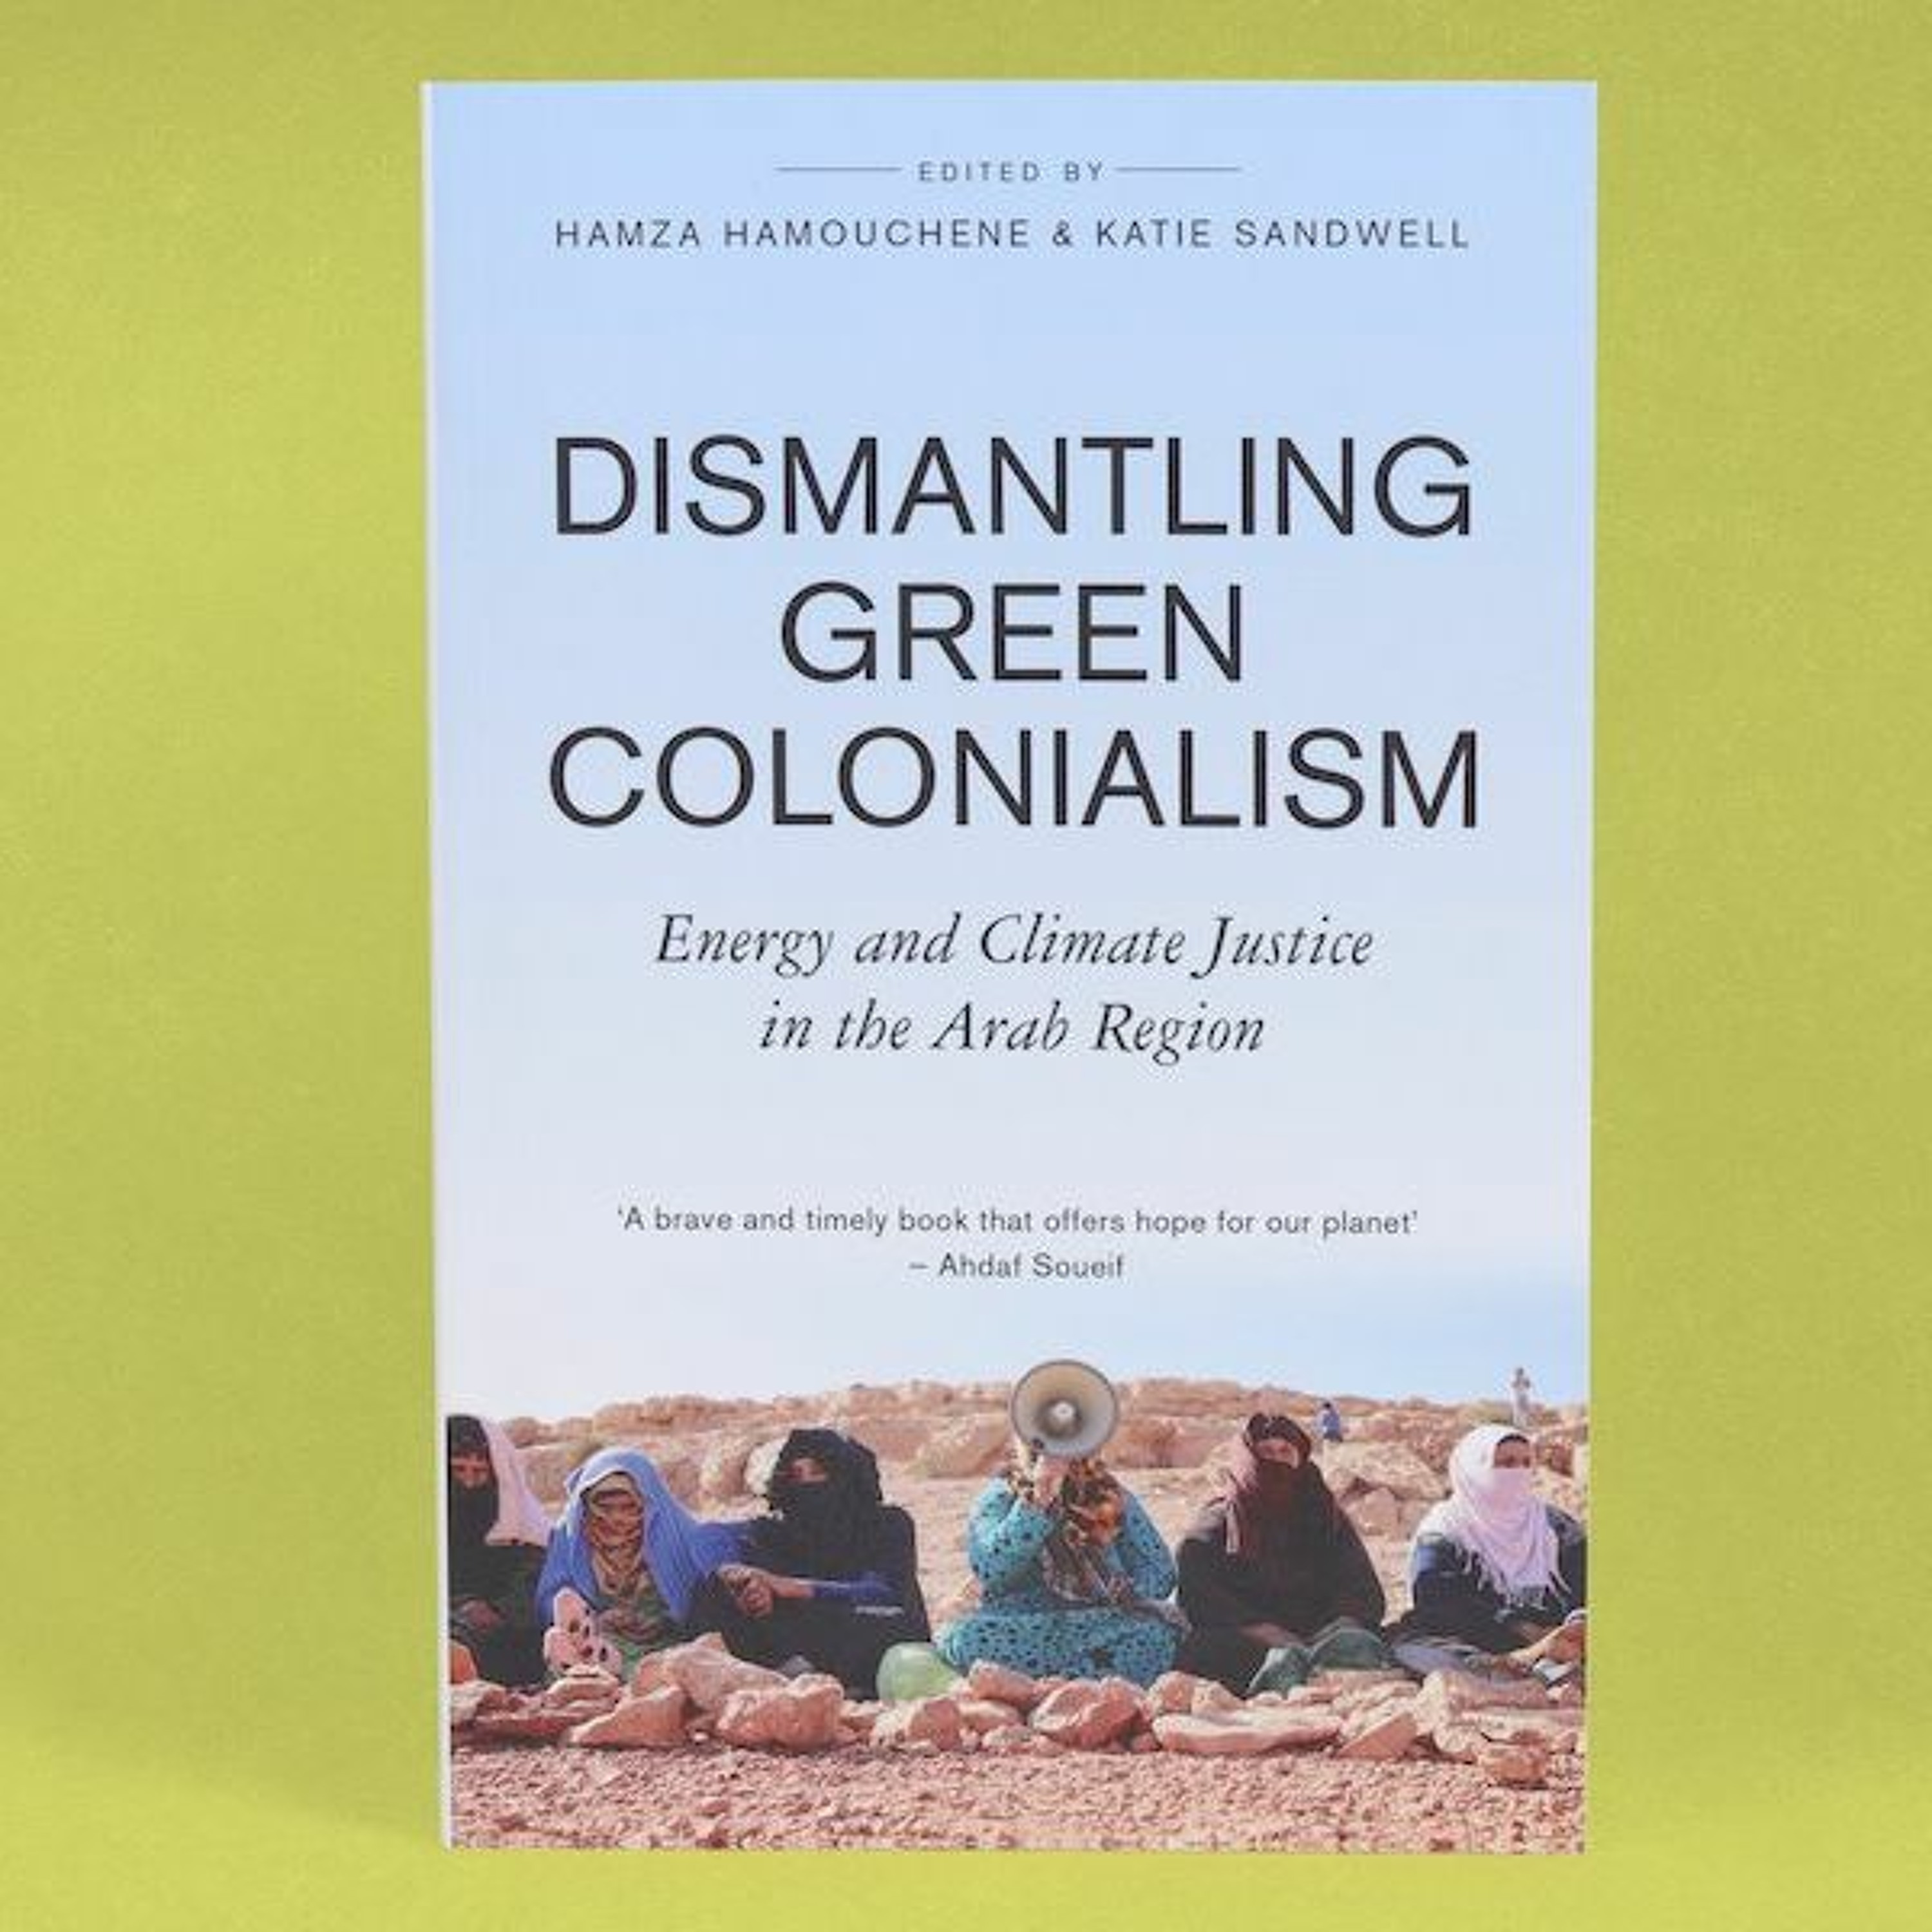 Dismantling Green Colonialism: Energy and Climate Justice in the Arab Region